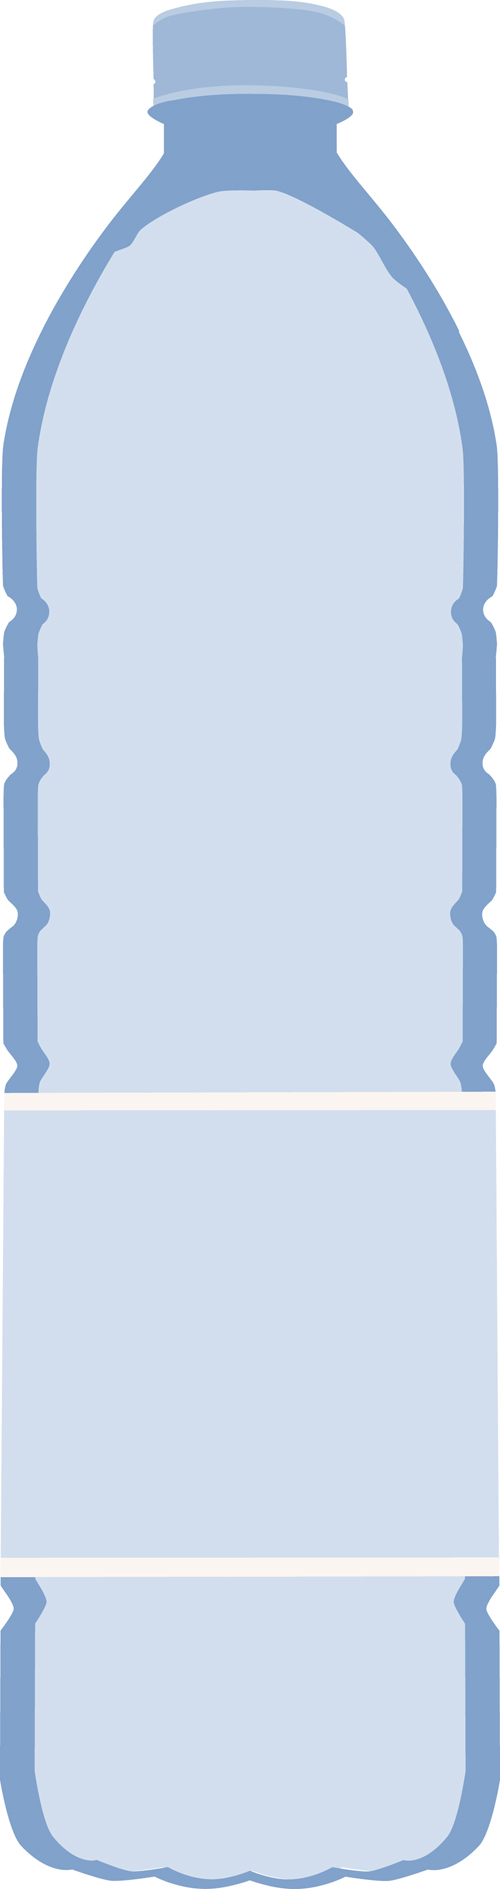 free-water-bottle-template-printable-printable-templates